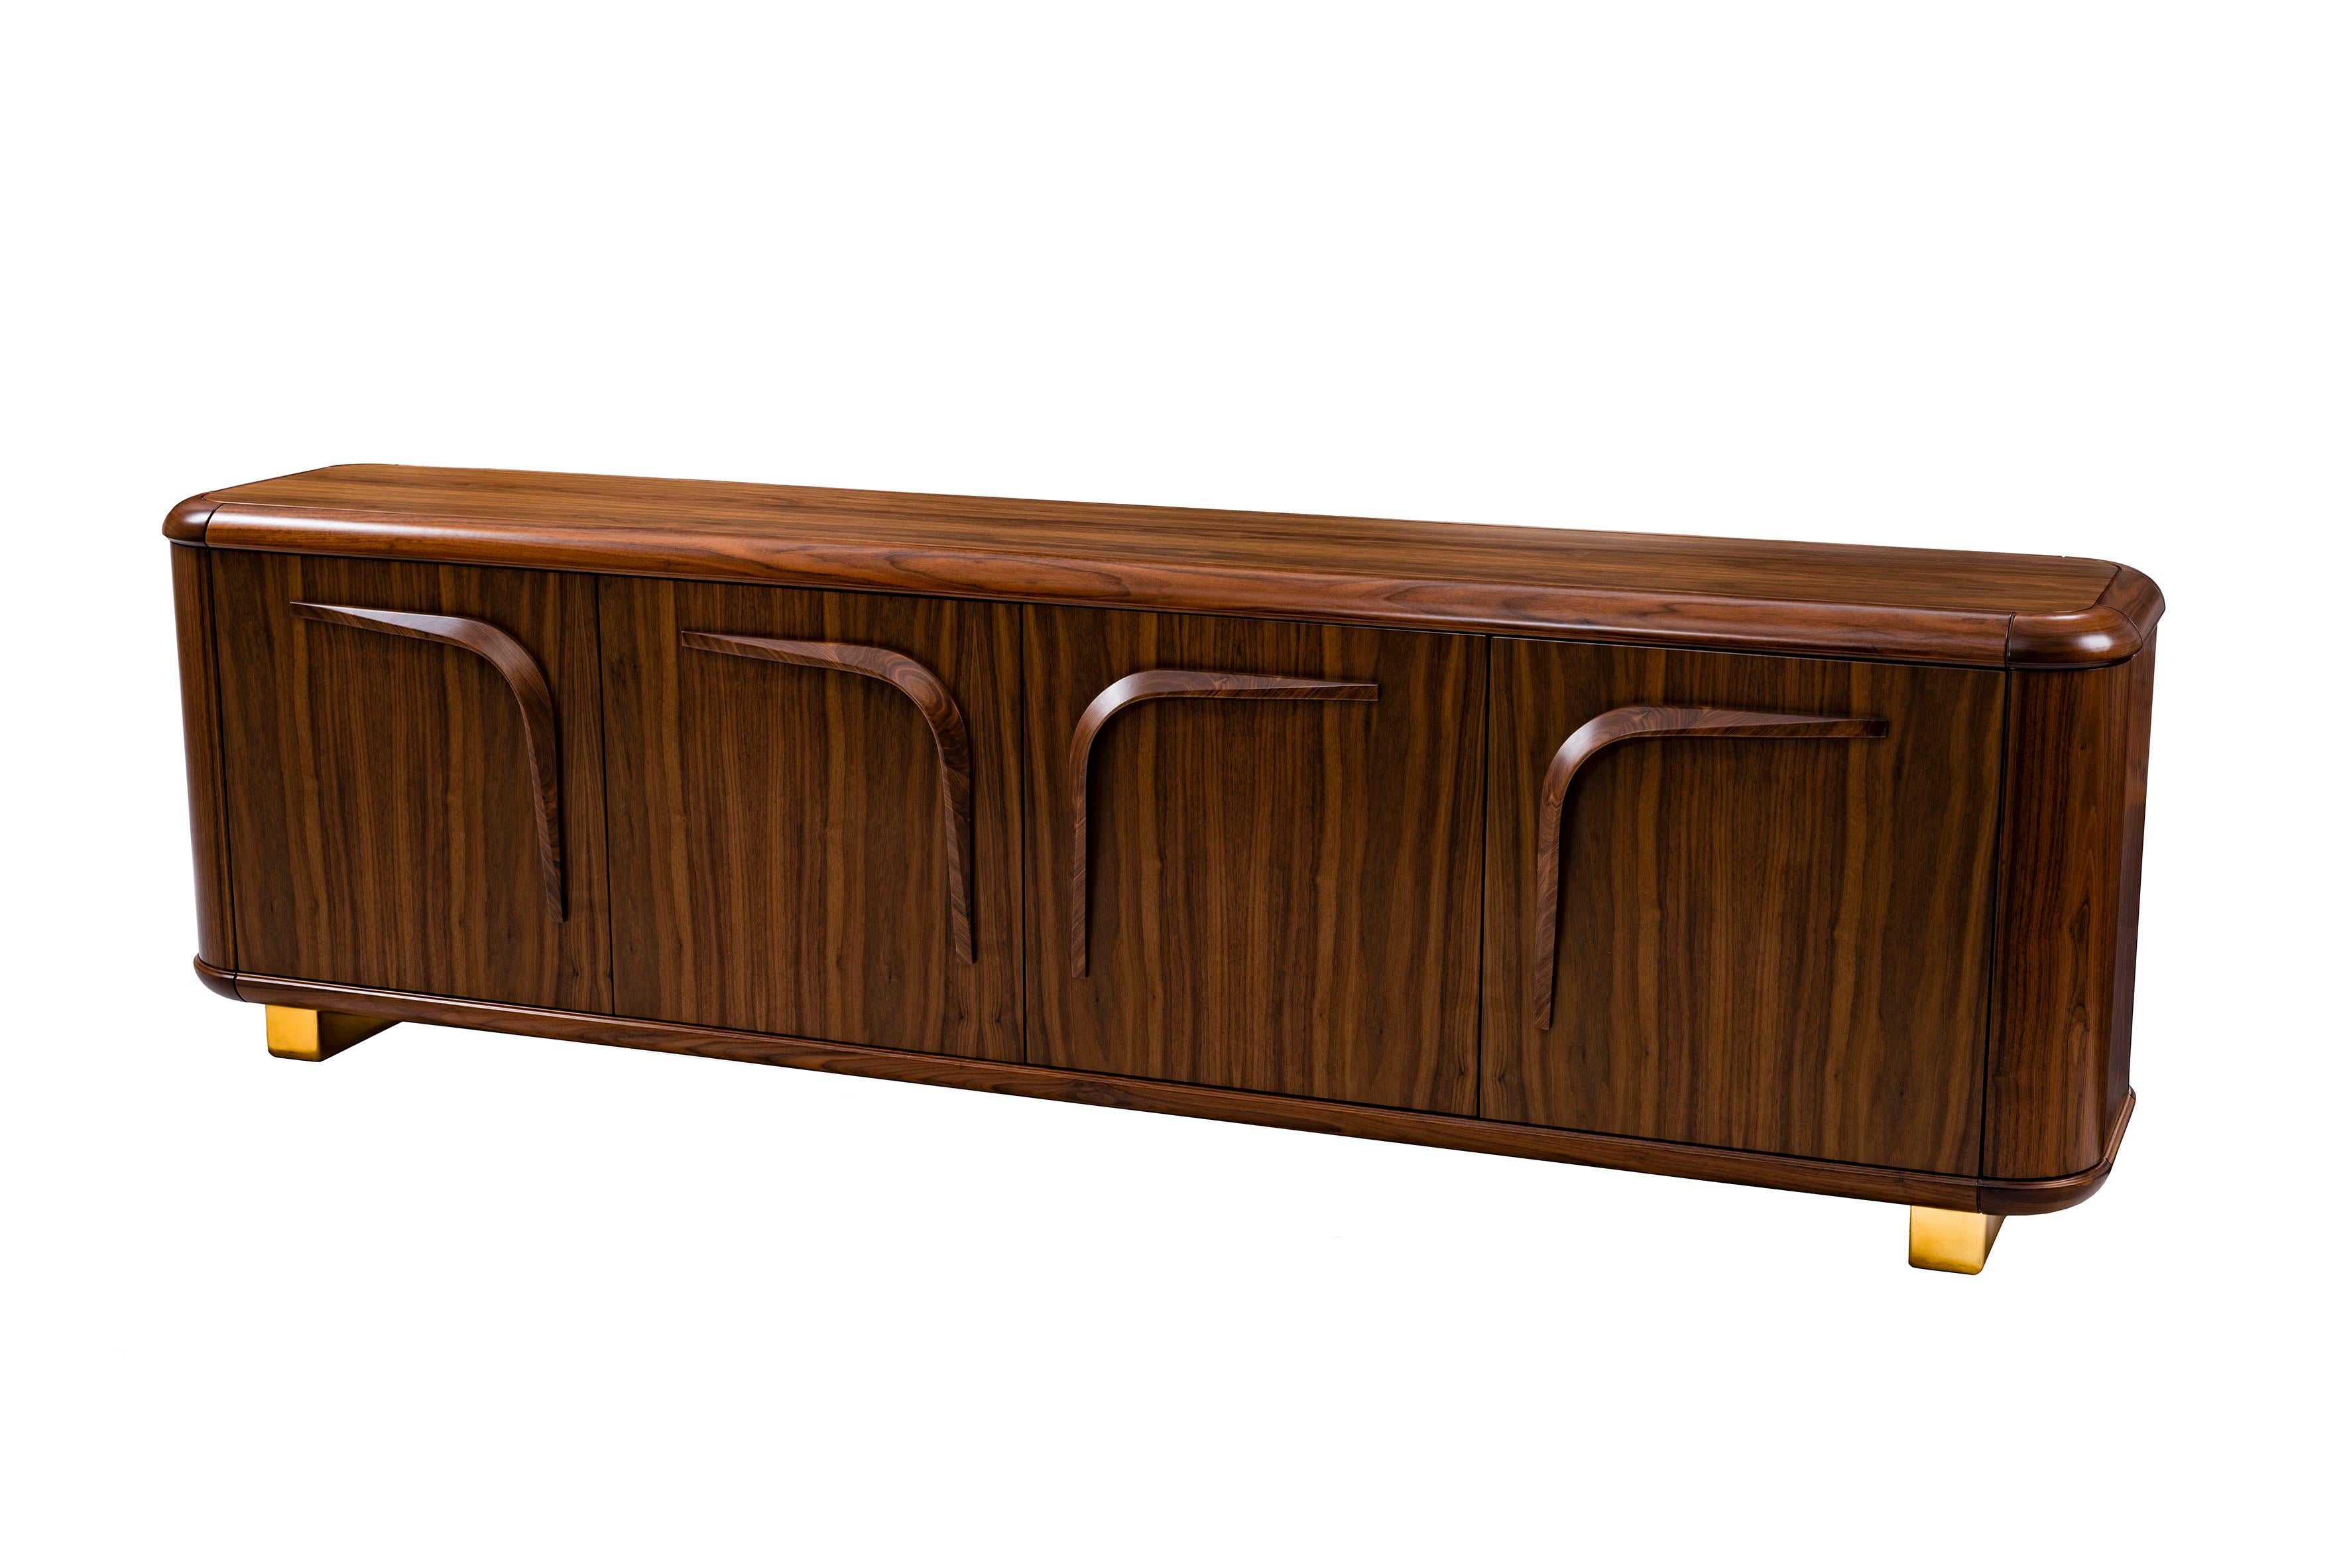 Contemporary sideboard wood by Cyril Rumpler, Dinner Box. The Sideboard is made in solid walnut and walnut veneer, brass legs, glossy finish. Entirely made of walnut or oak. 
The elegant base reflects the curved design of the furniture and ensures